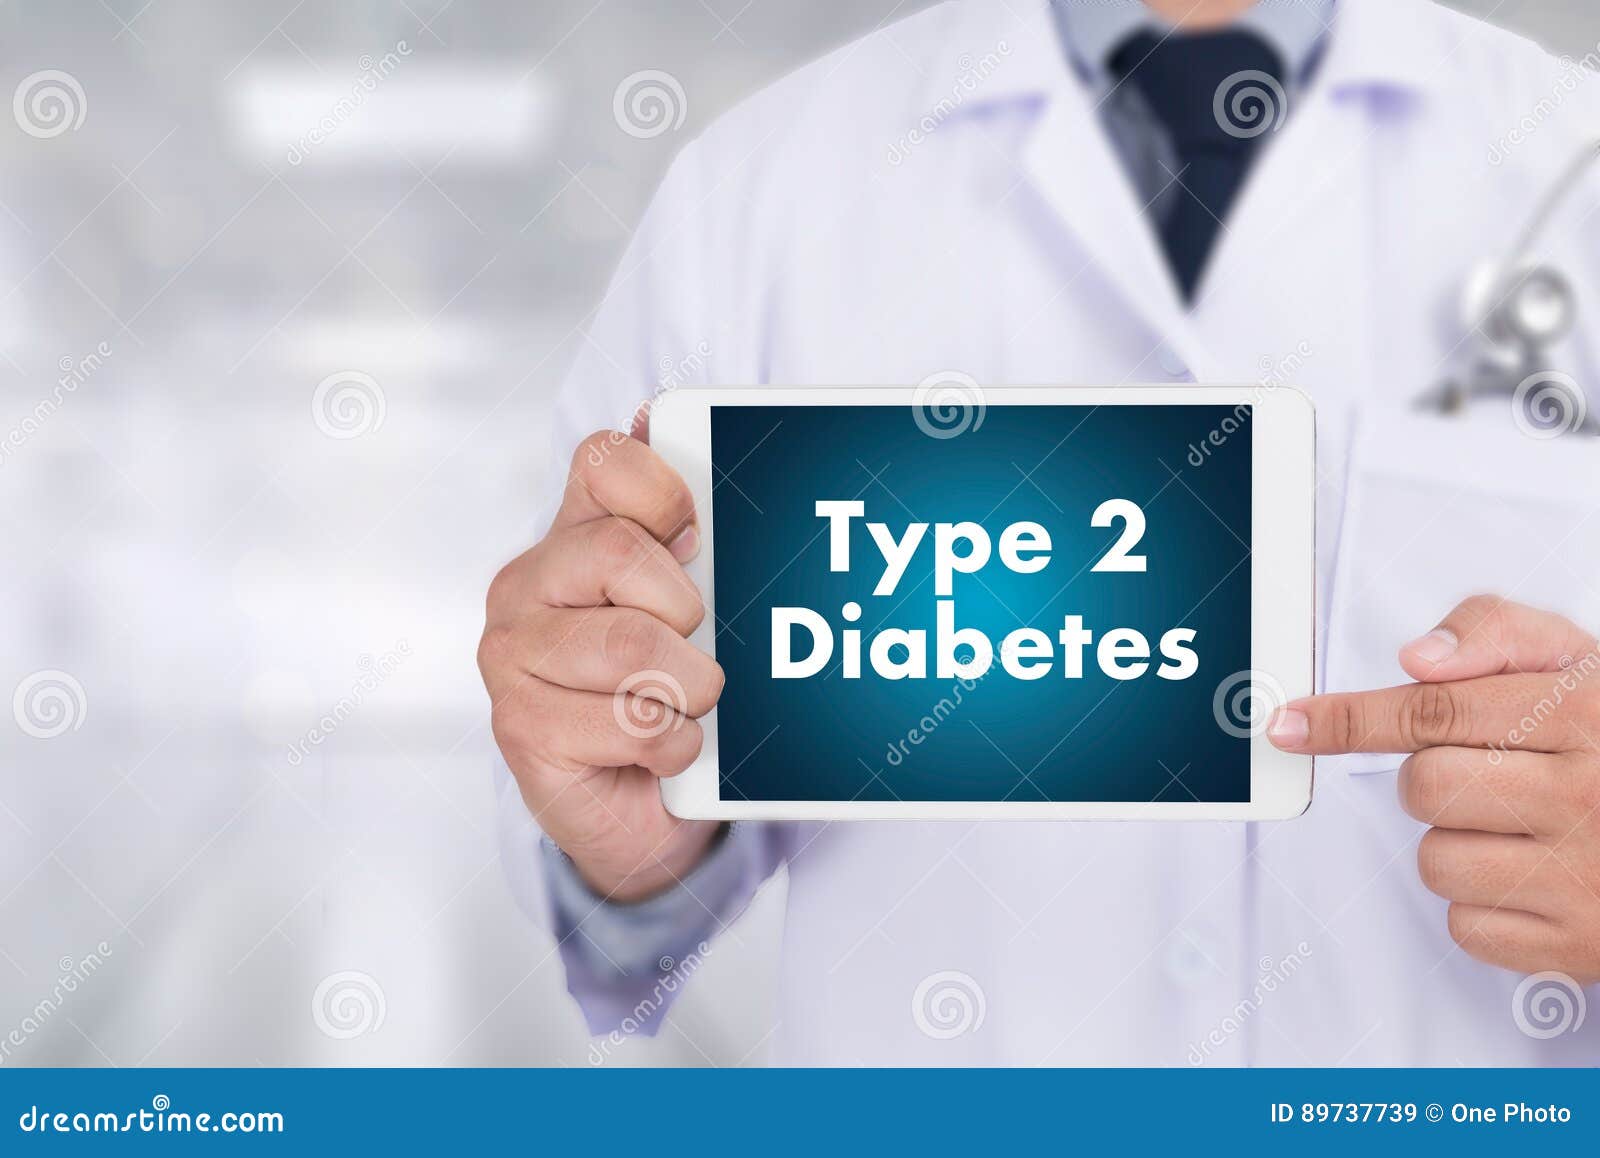 type 2 diabetes doctor a test disease health medical concept